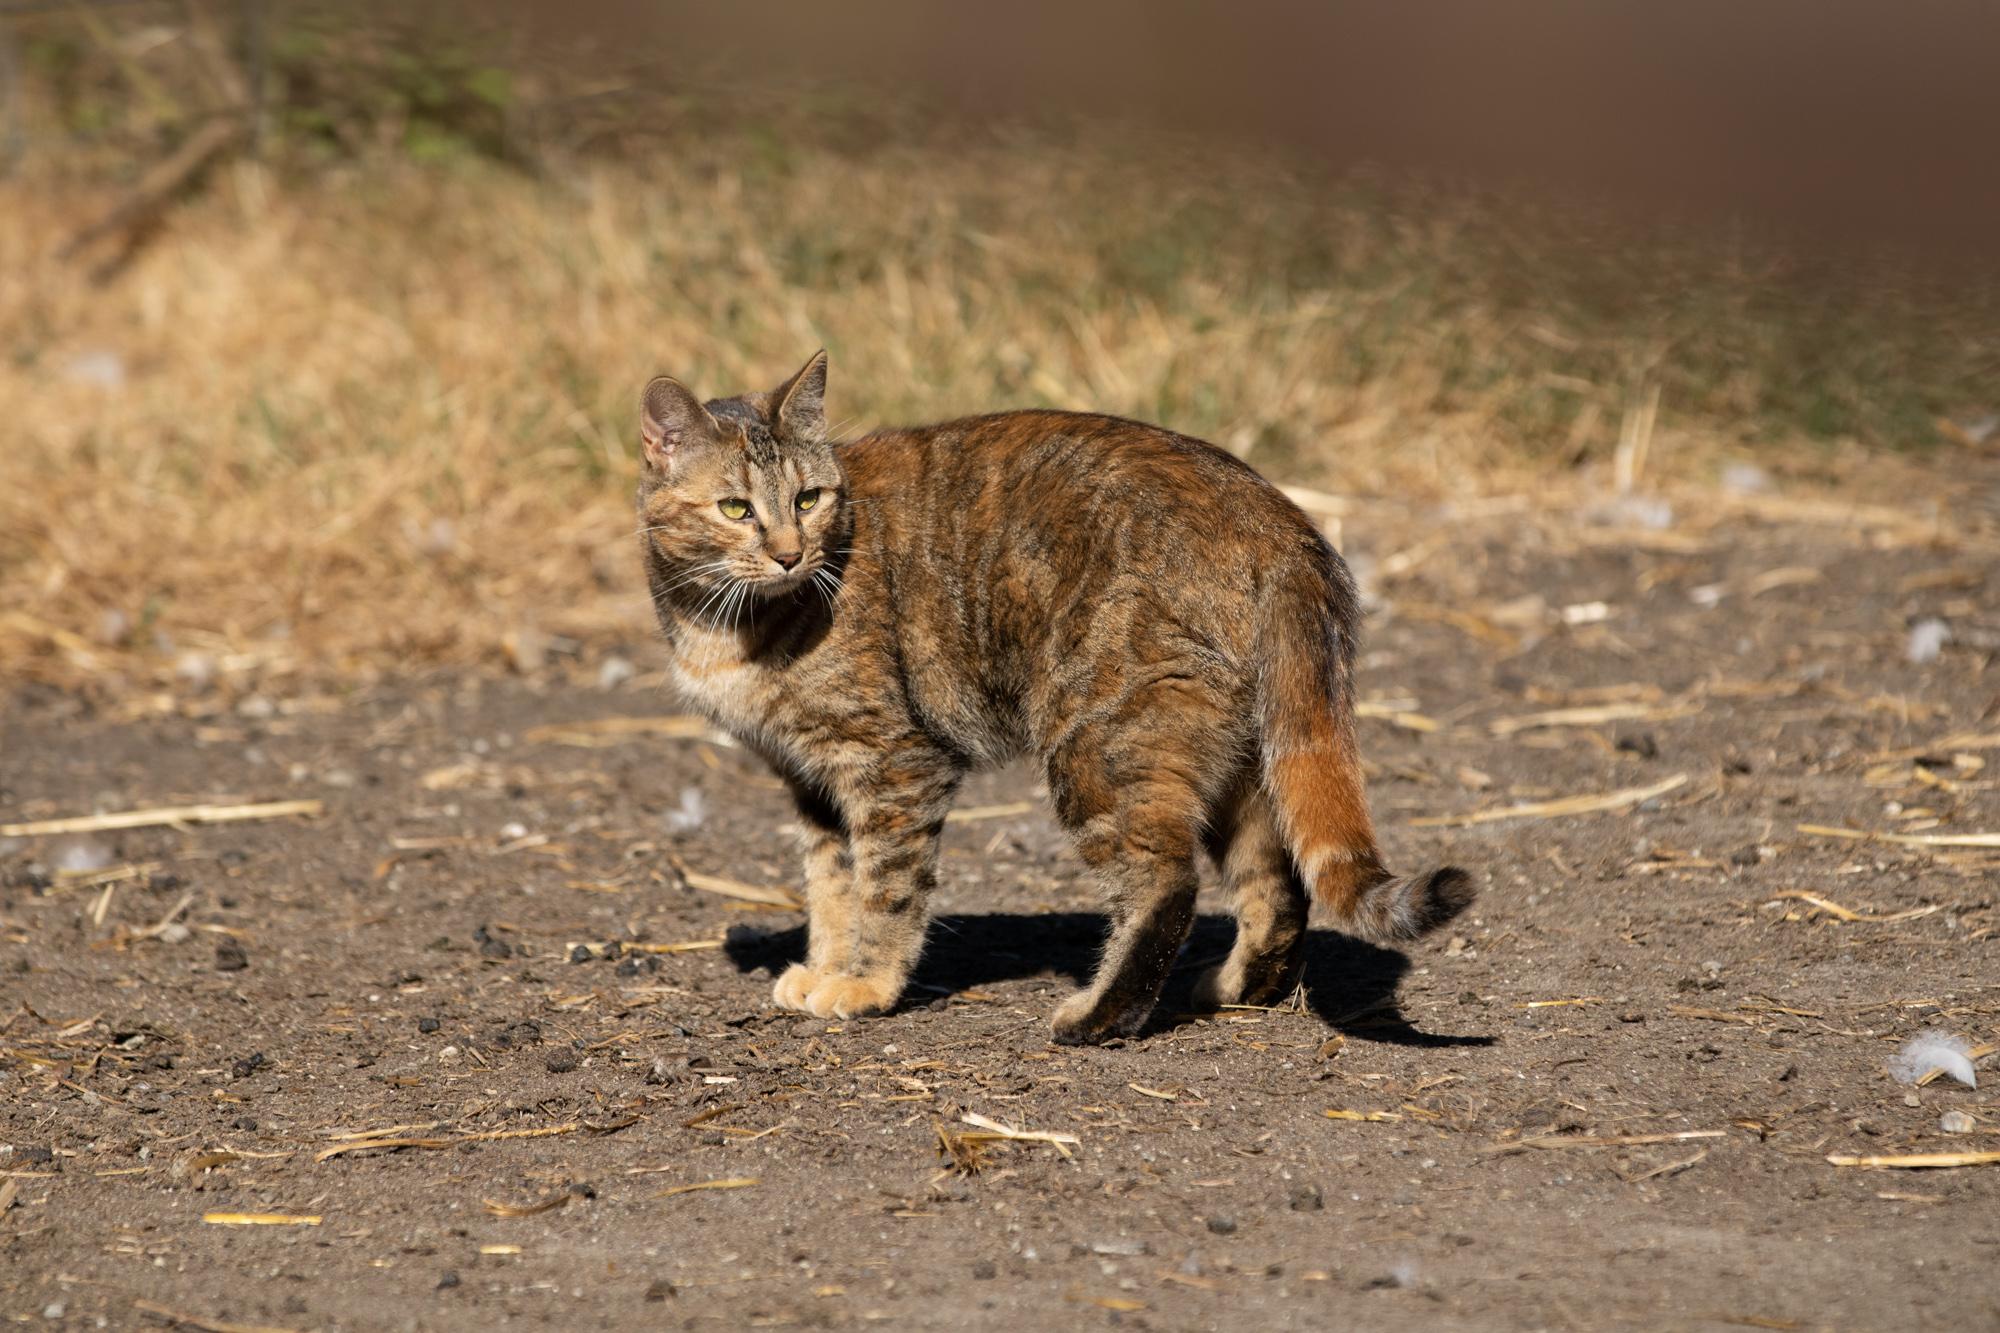 Cat standing on dirt looking back